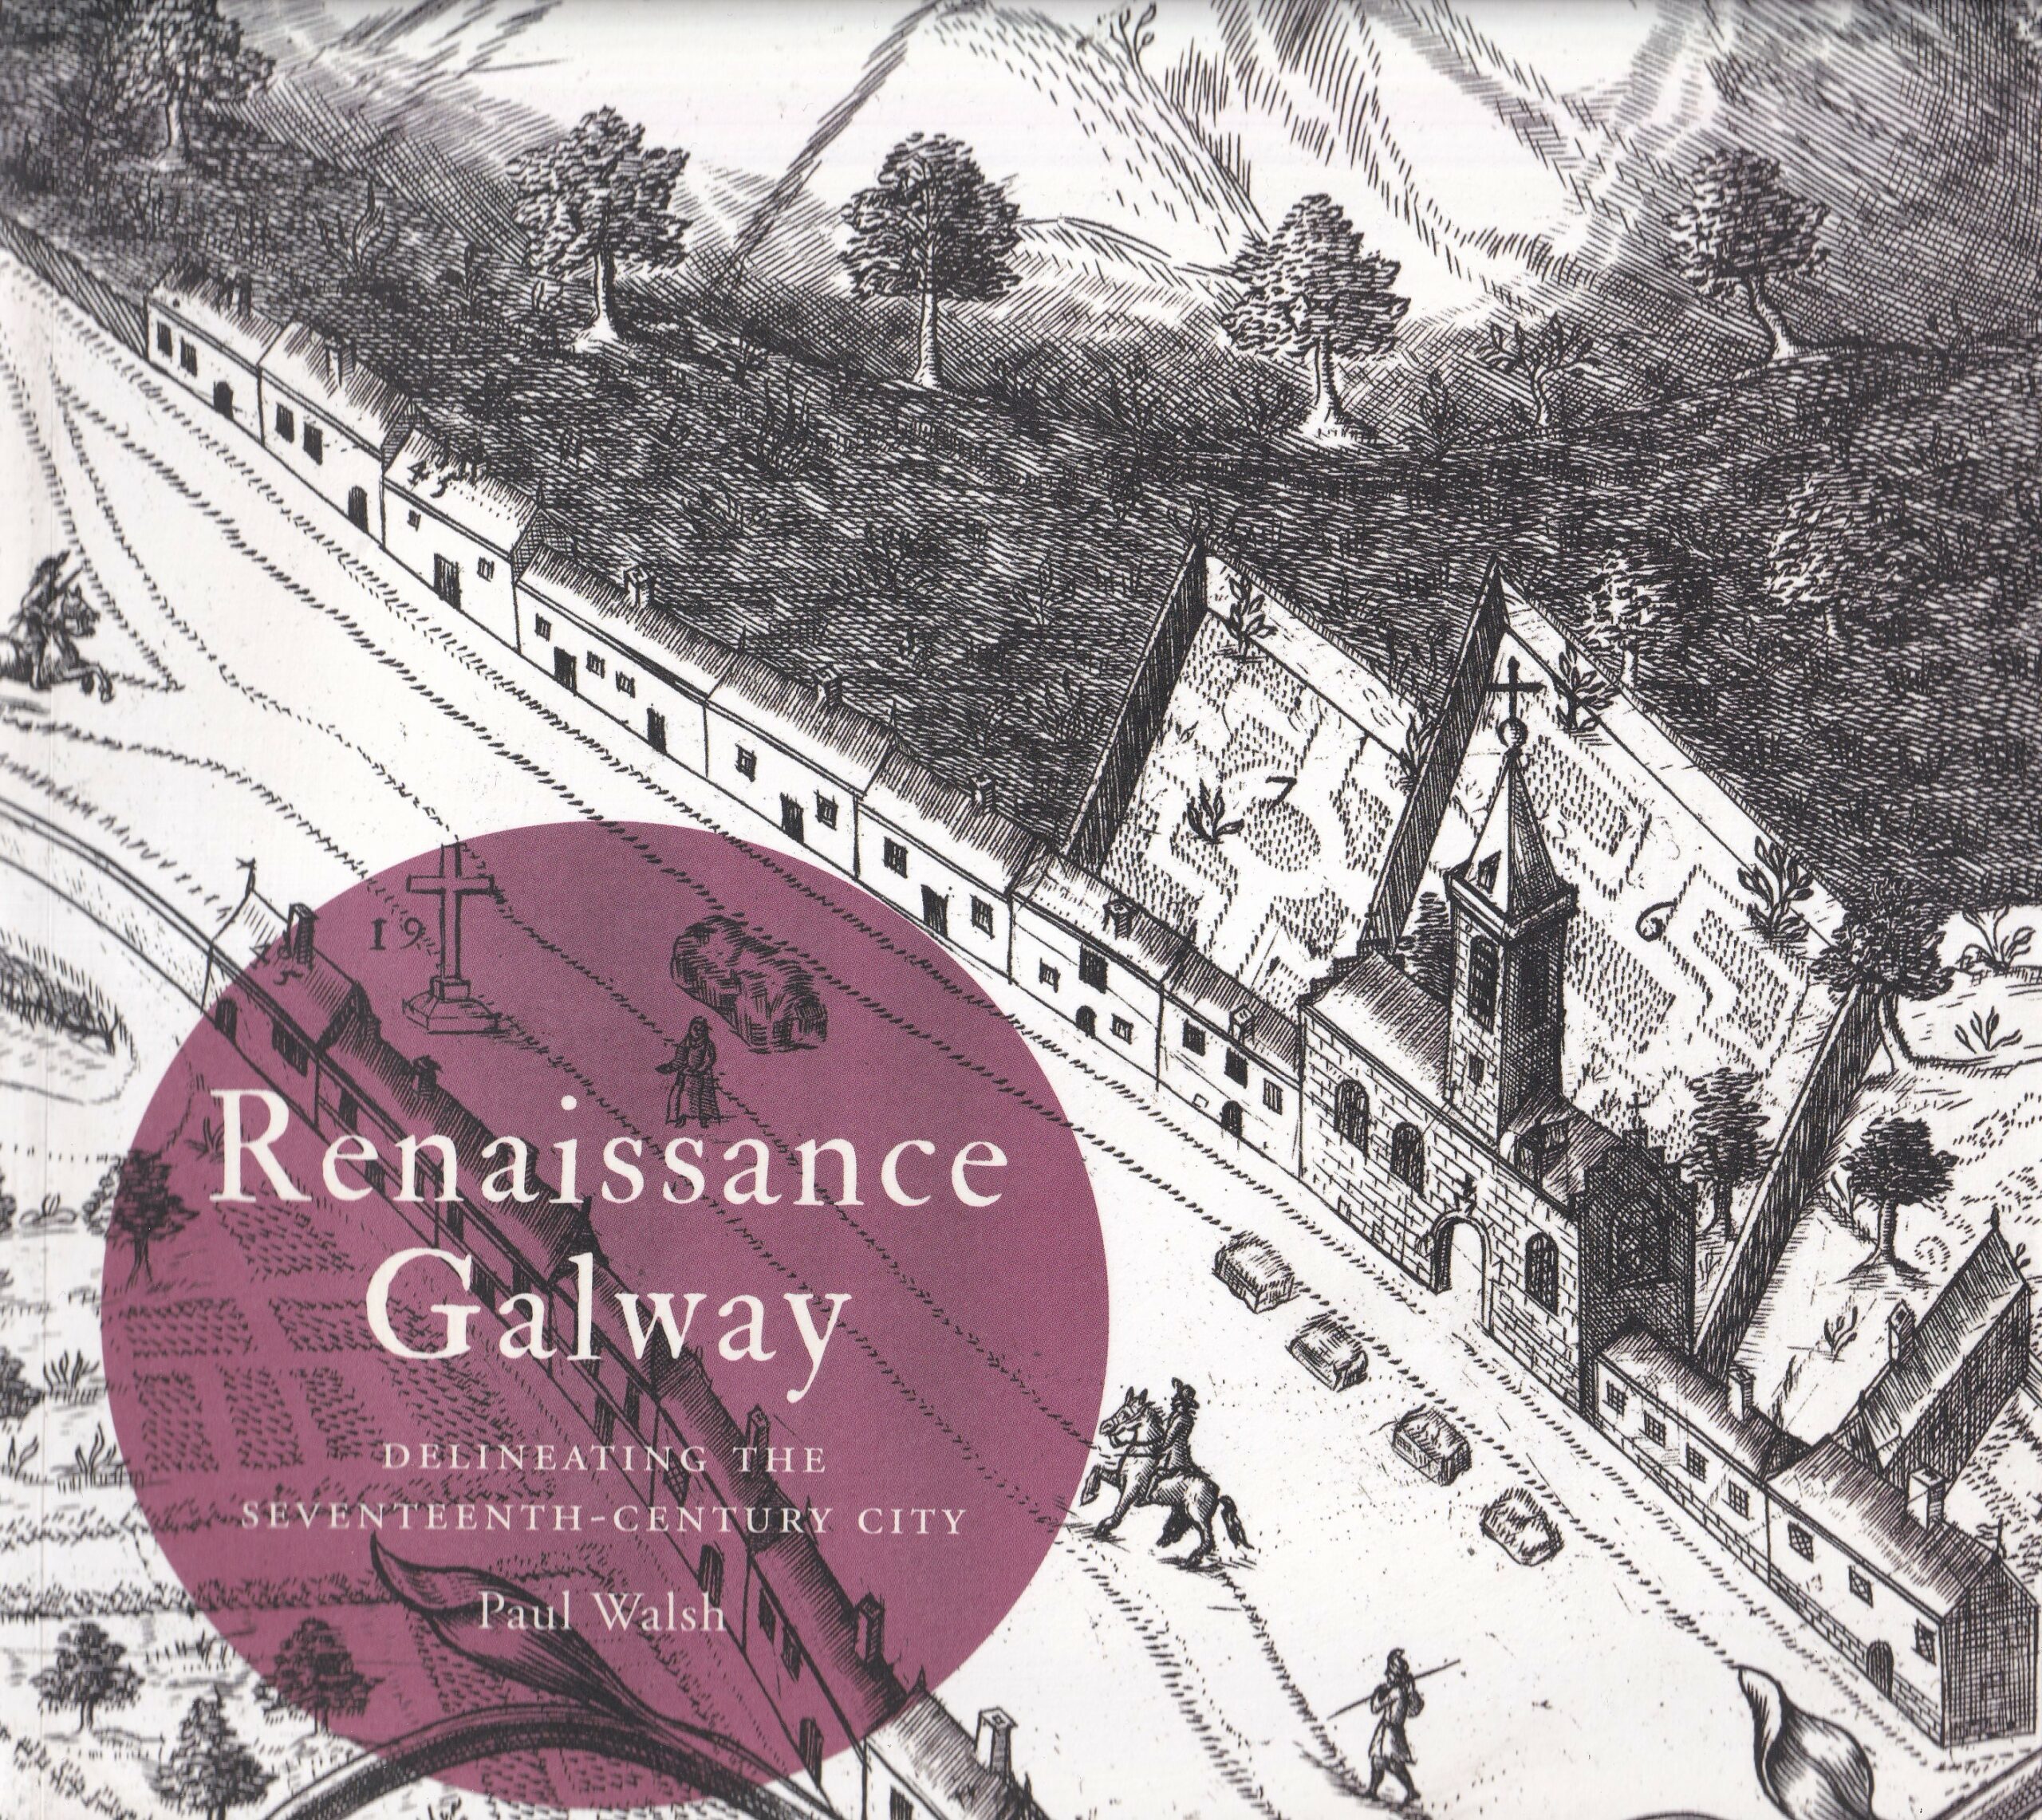 Renaissance Galway: Delineating the Seventeenth-Century City- Signed | Paul Walsh | Charlie Byrne's